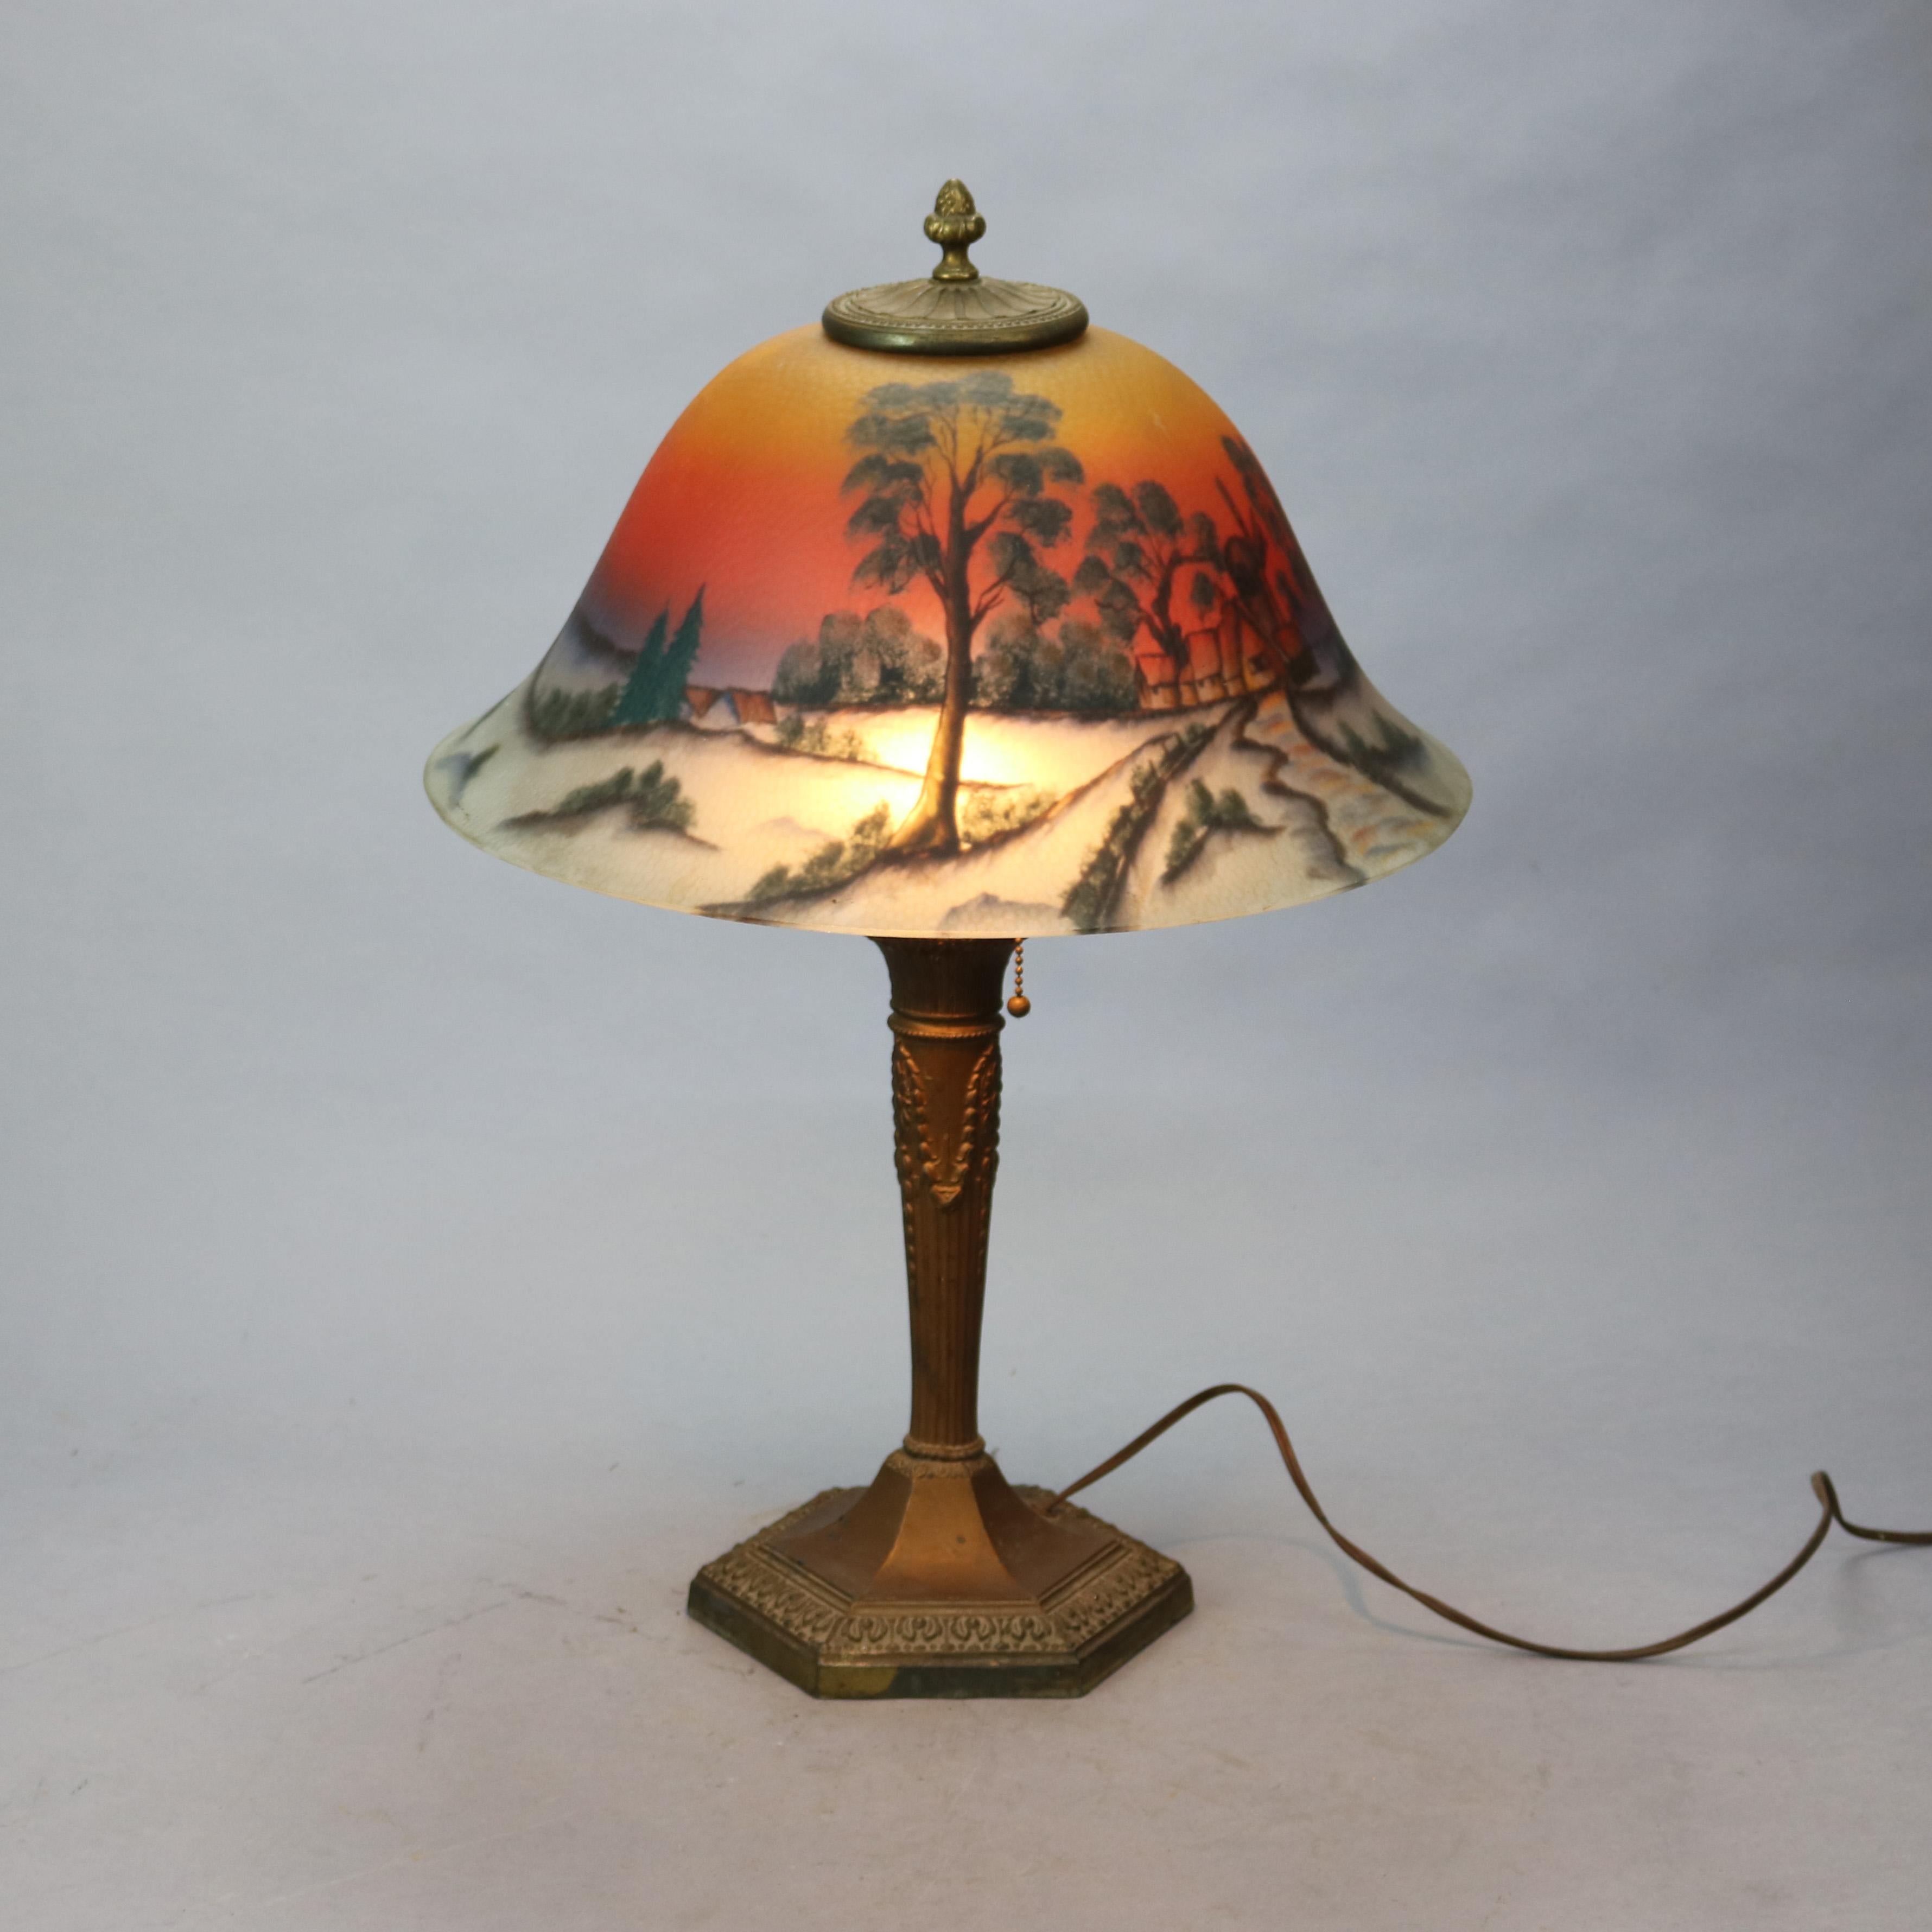 An antique Arts and Crafts lamp by Phoenix offers bell form shade with reverse painted landscape scene over cast double socket metal base, c1920

Measures - 23.5''H x 16.25''W x 16.25''D.